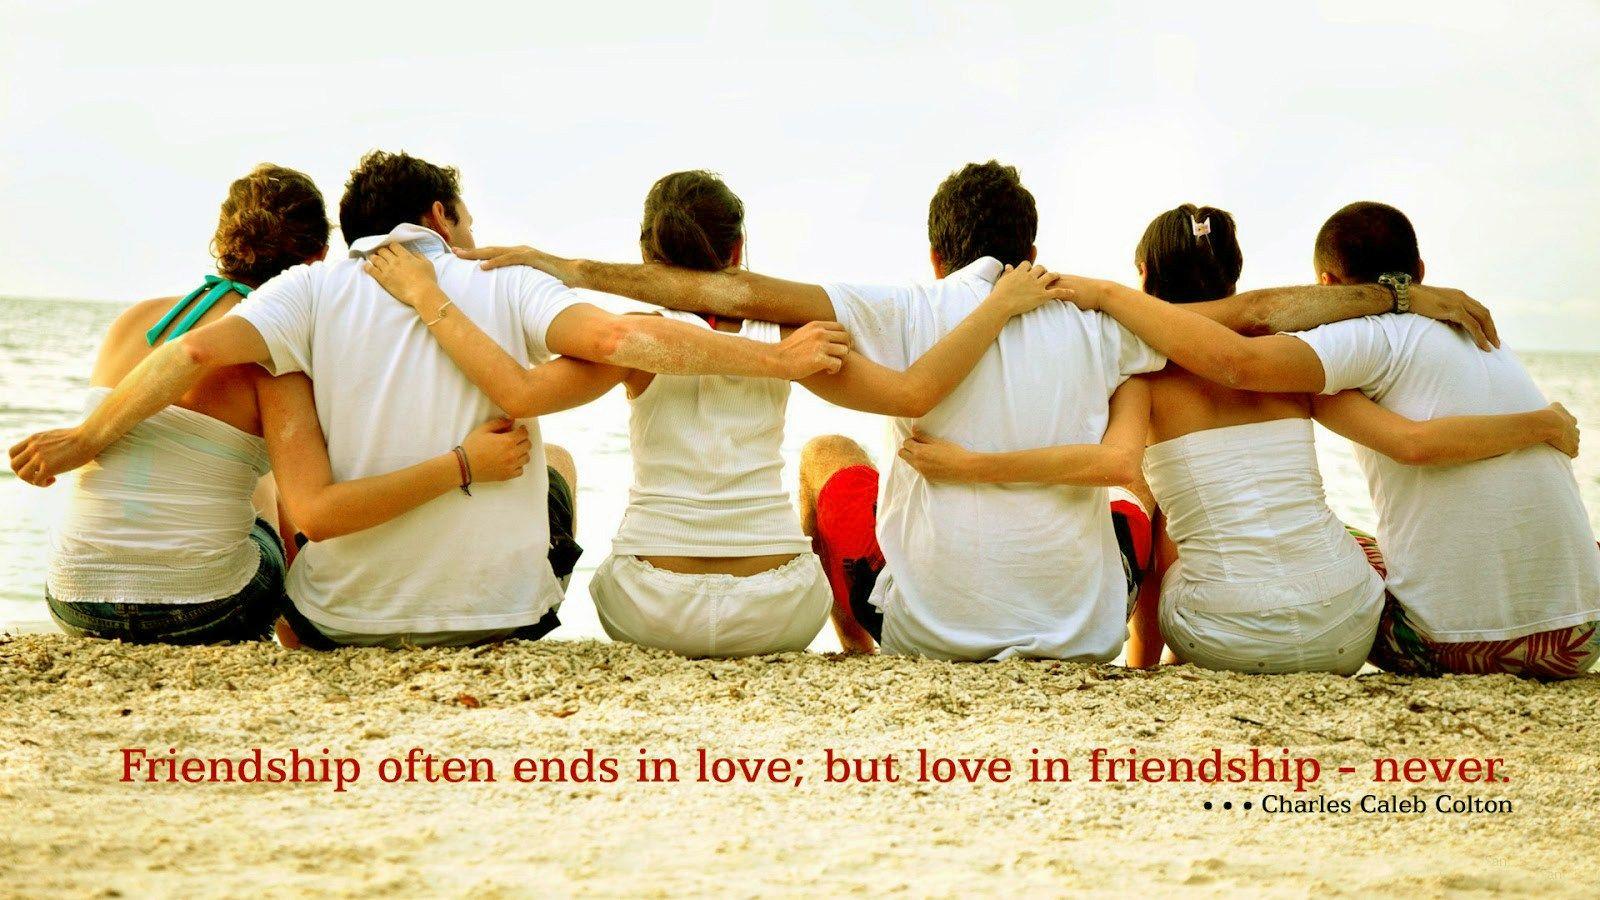 Friendship Day HD Image Wallpaper Free Download 2